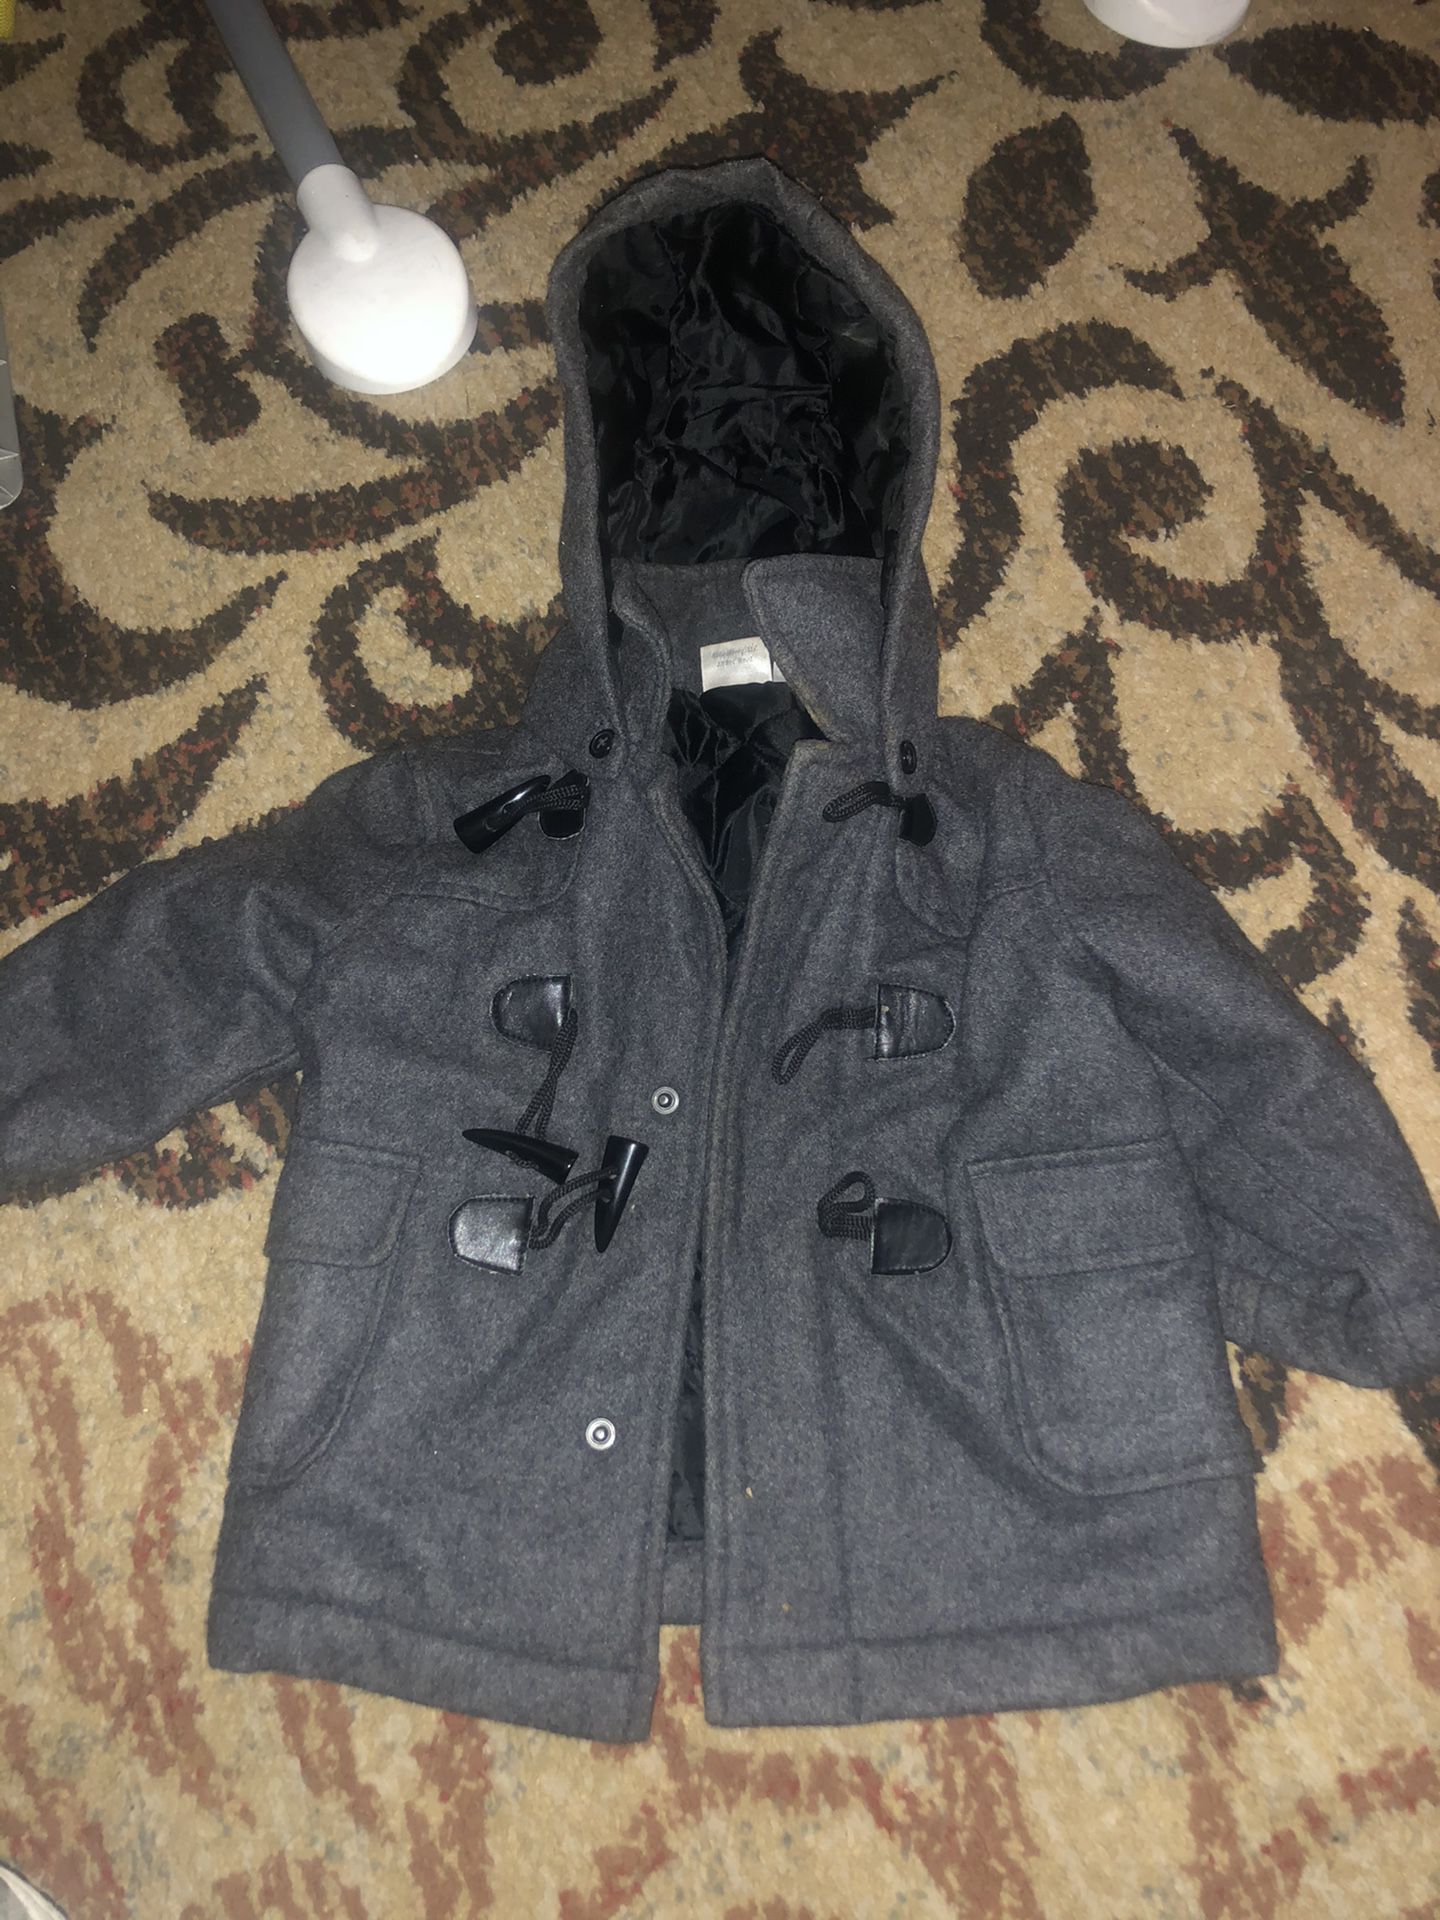 All 12 Kids toddlers Winter coats 2T & 3T $60